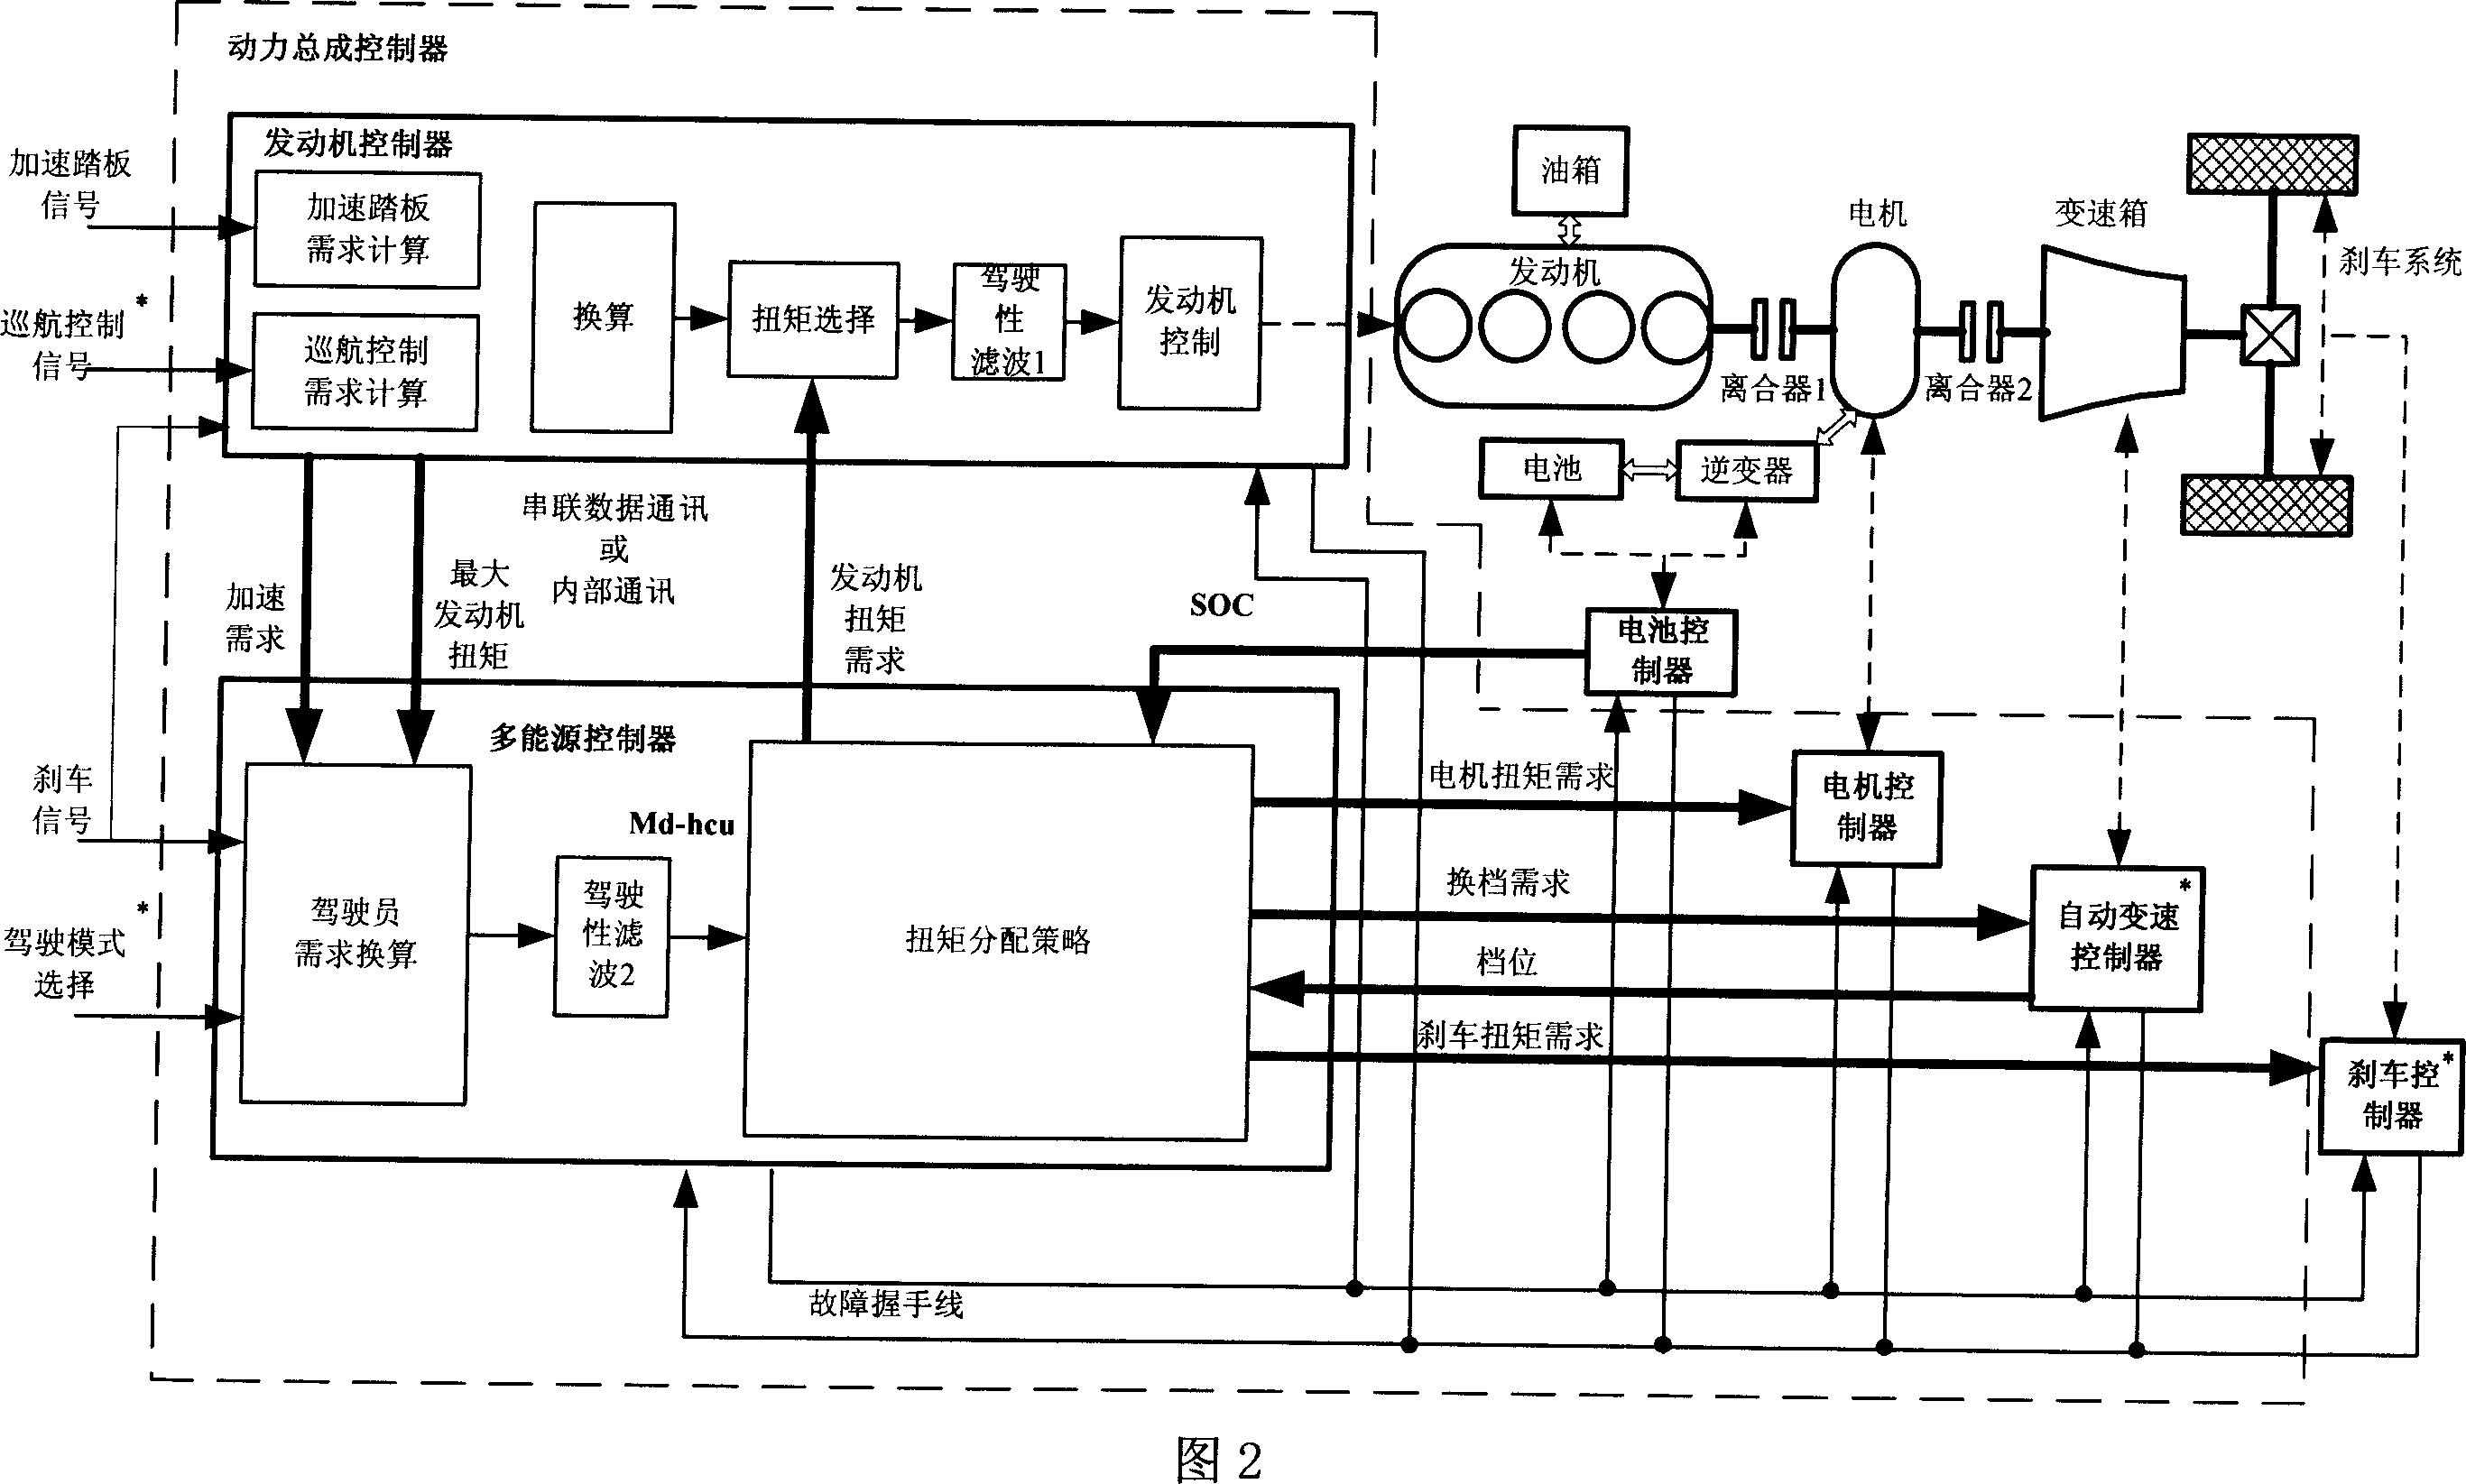 Architecture and system of safe torque monitor for mixed power automobile